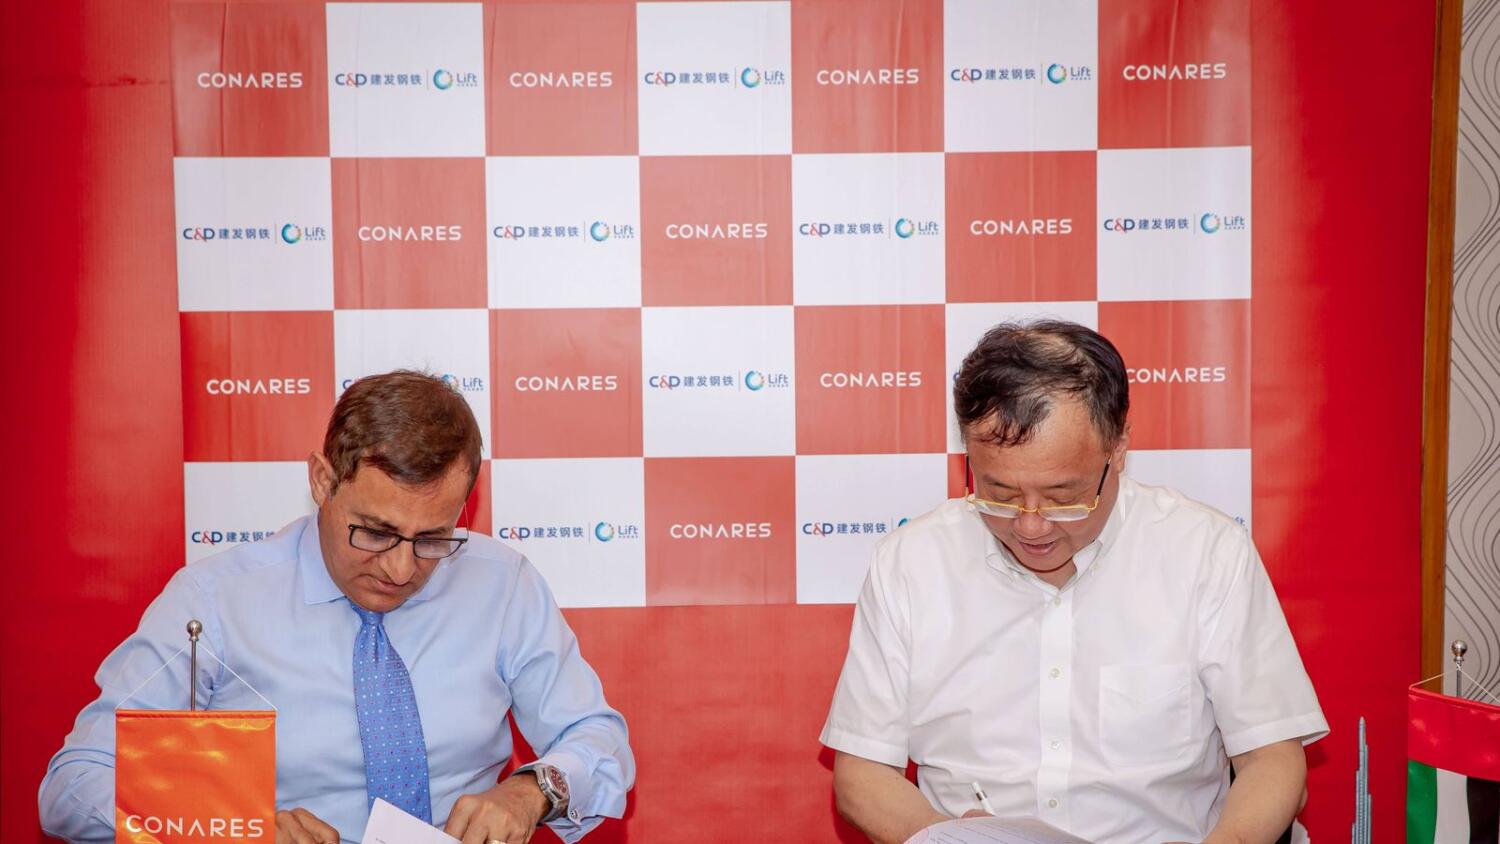 The official signing of the partnership took place at Conares’ steel plant in the Jebel Ali Free Zone (JAFZA) in Dubai. Zheng Yongda, general manager of Xiamen C&amp;D Corporation Limited &amp; Deputy Party Secretary and Bharat Bhatia, Chairman and CEO of Conares, was also present, accompanied by other distinguished guests and senior executives from Conares.